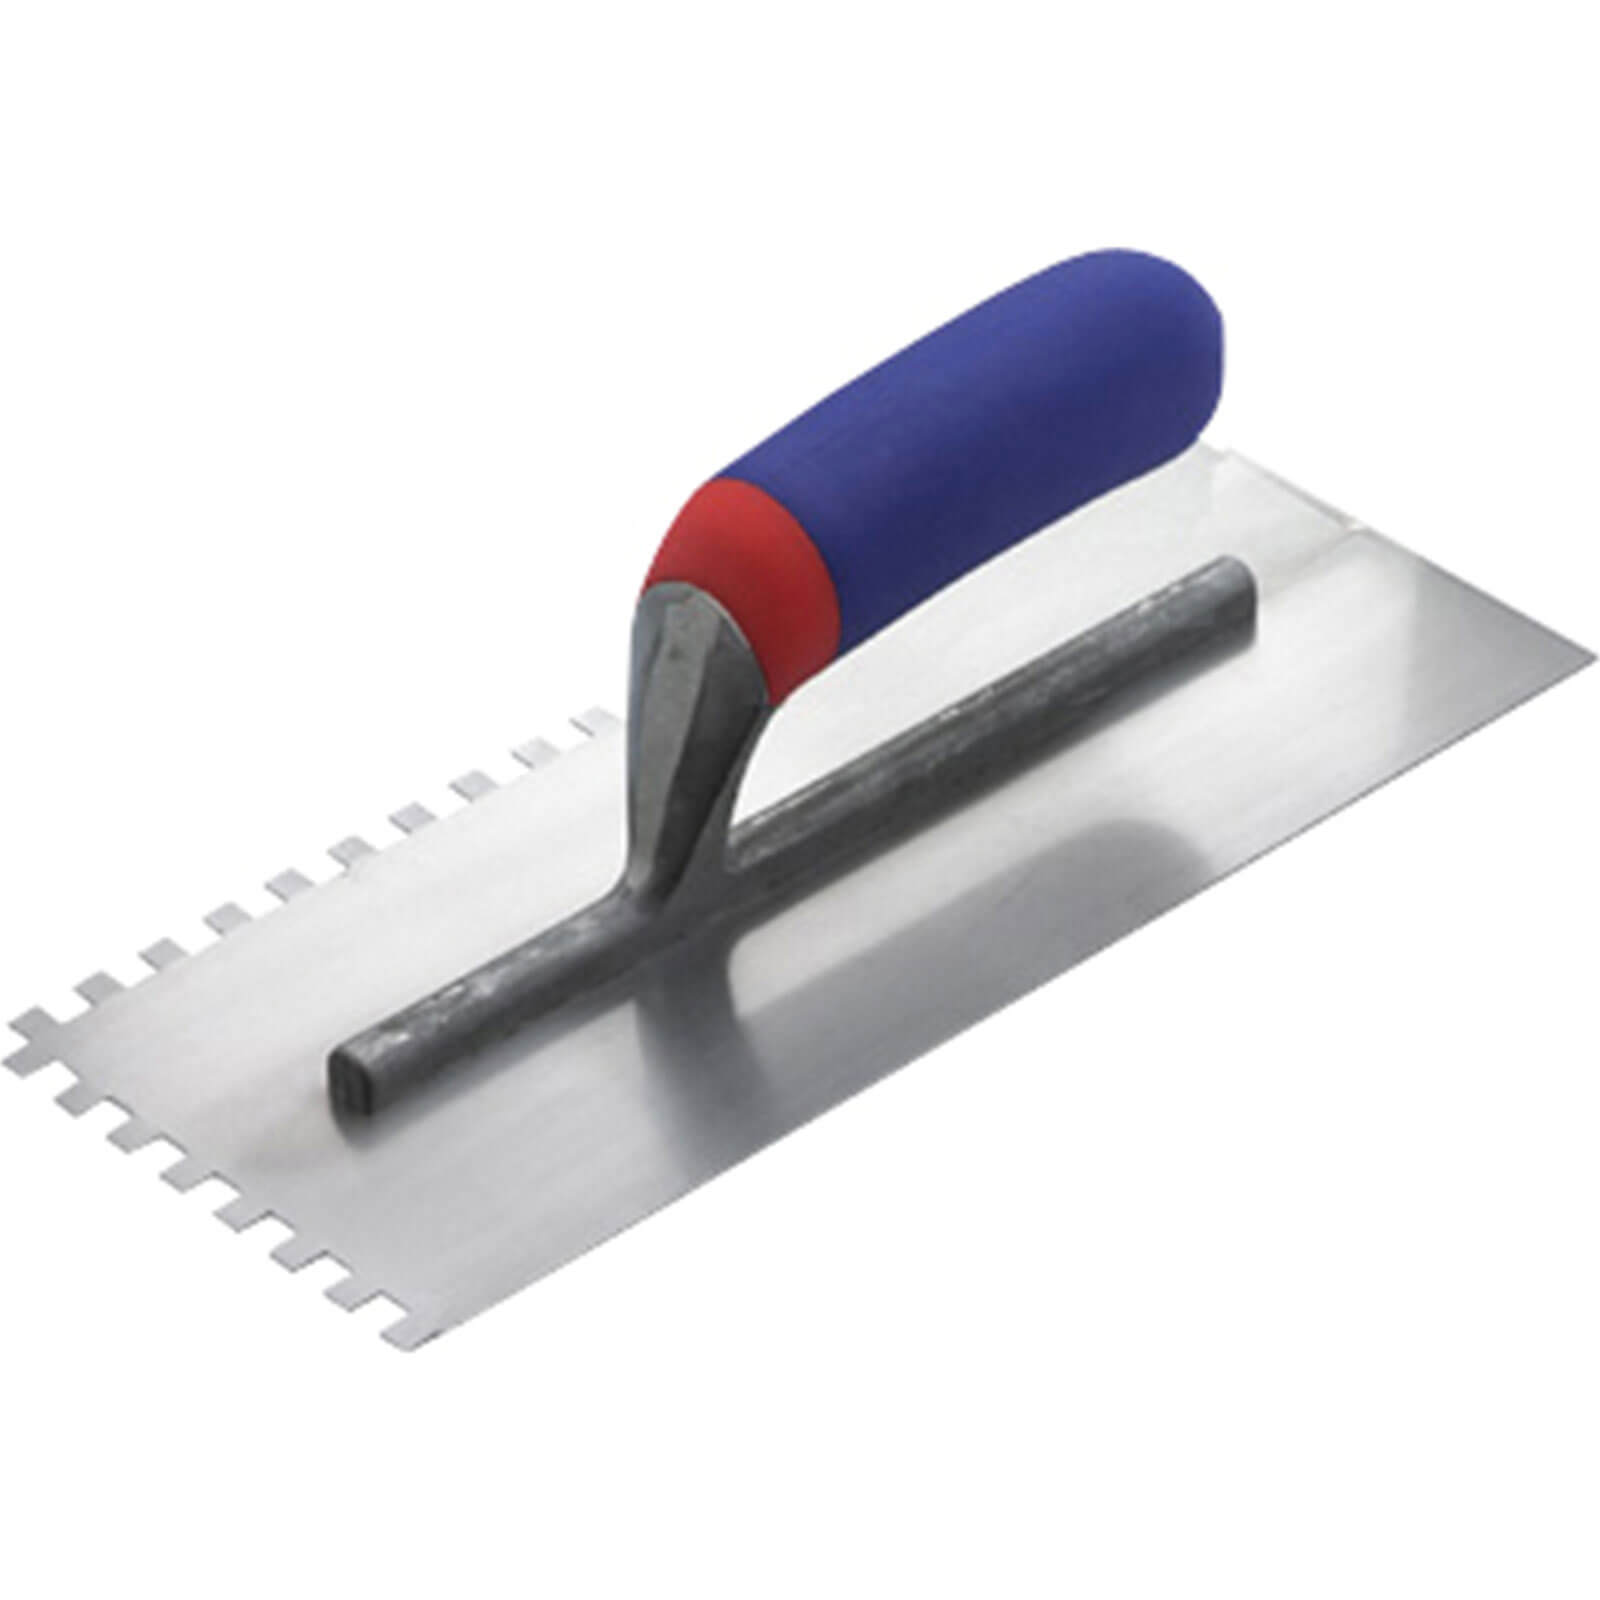 Photo of Rst Notched Trowel 11